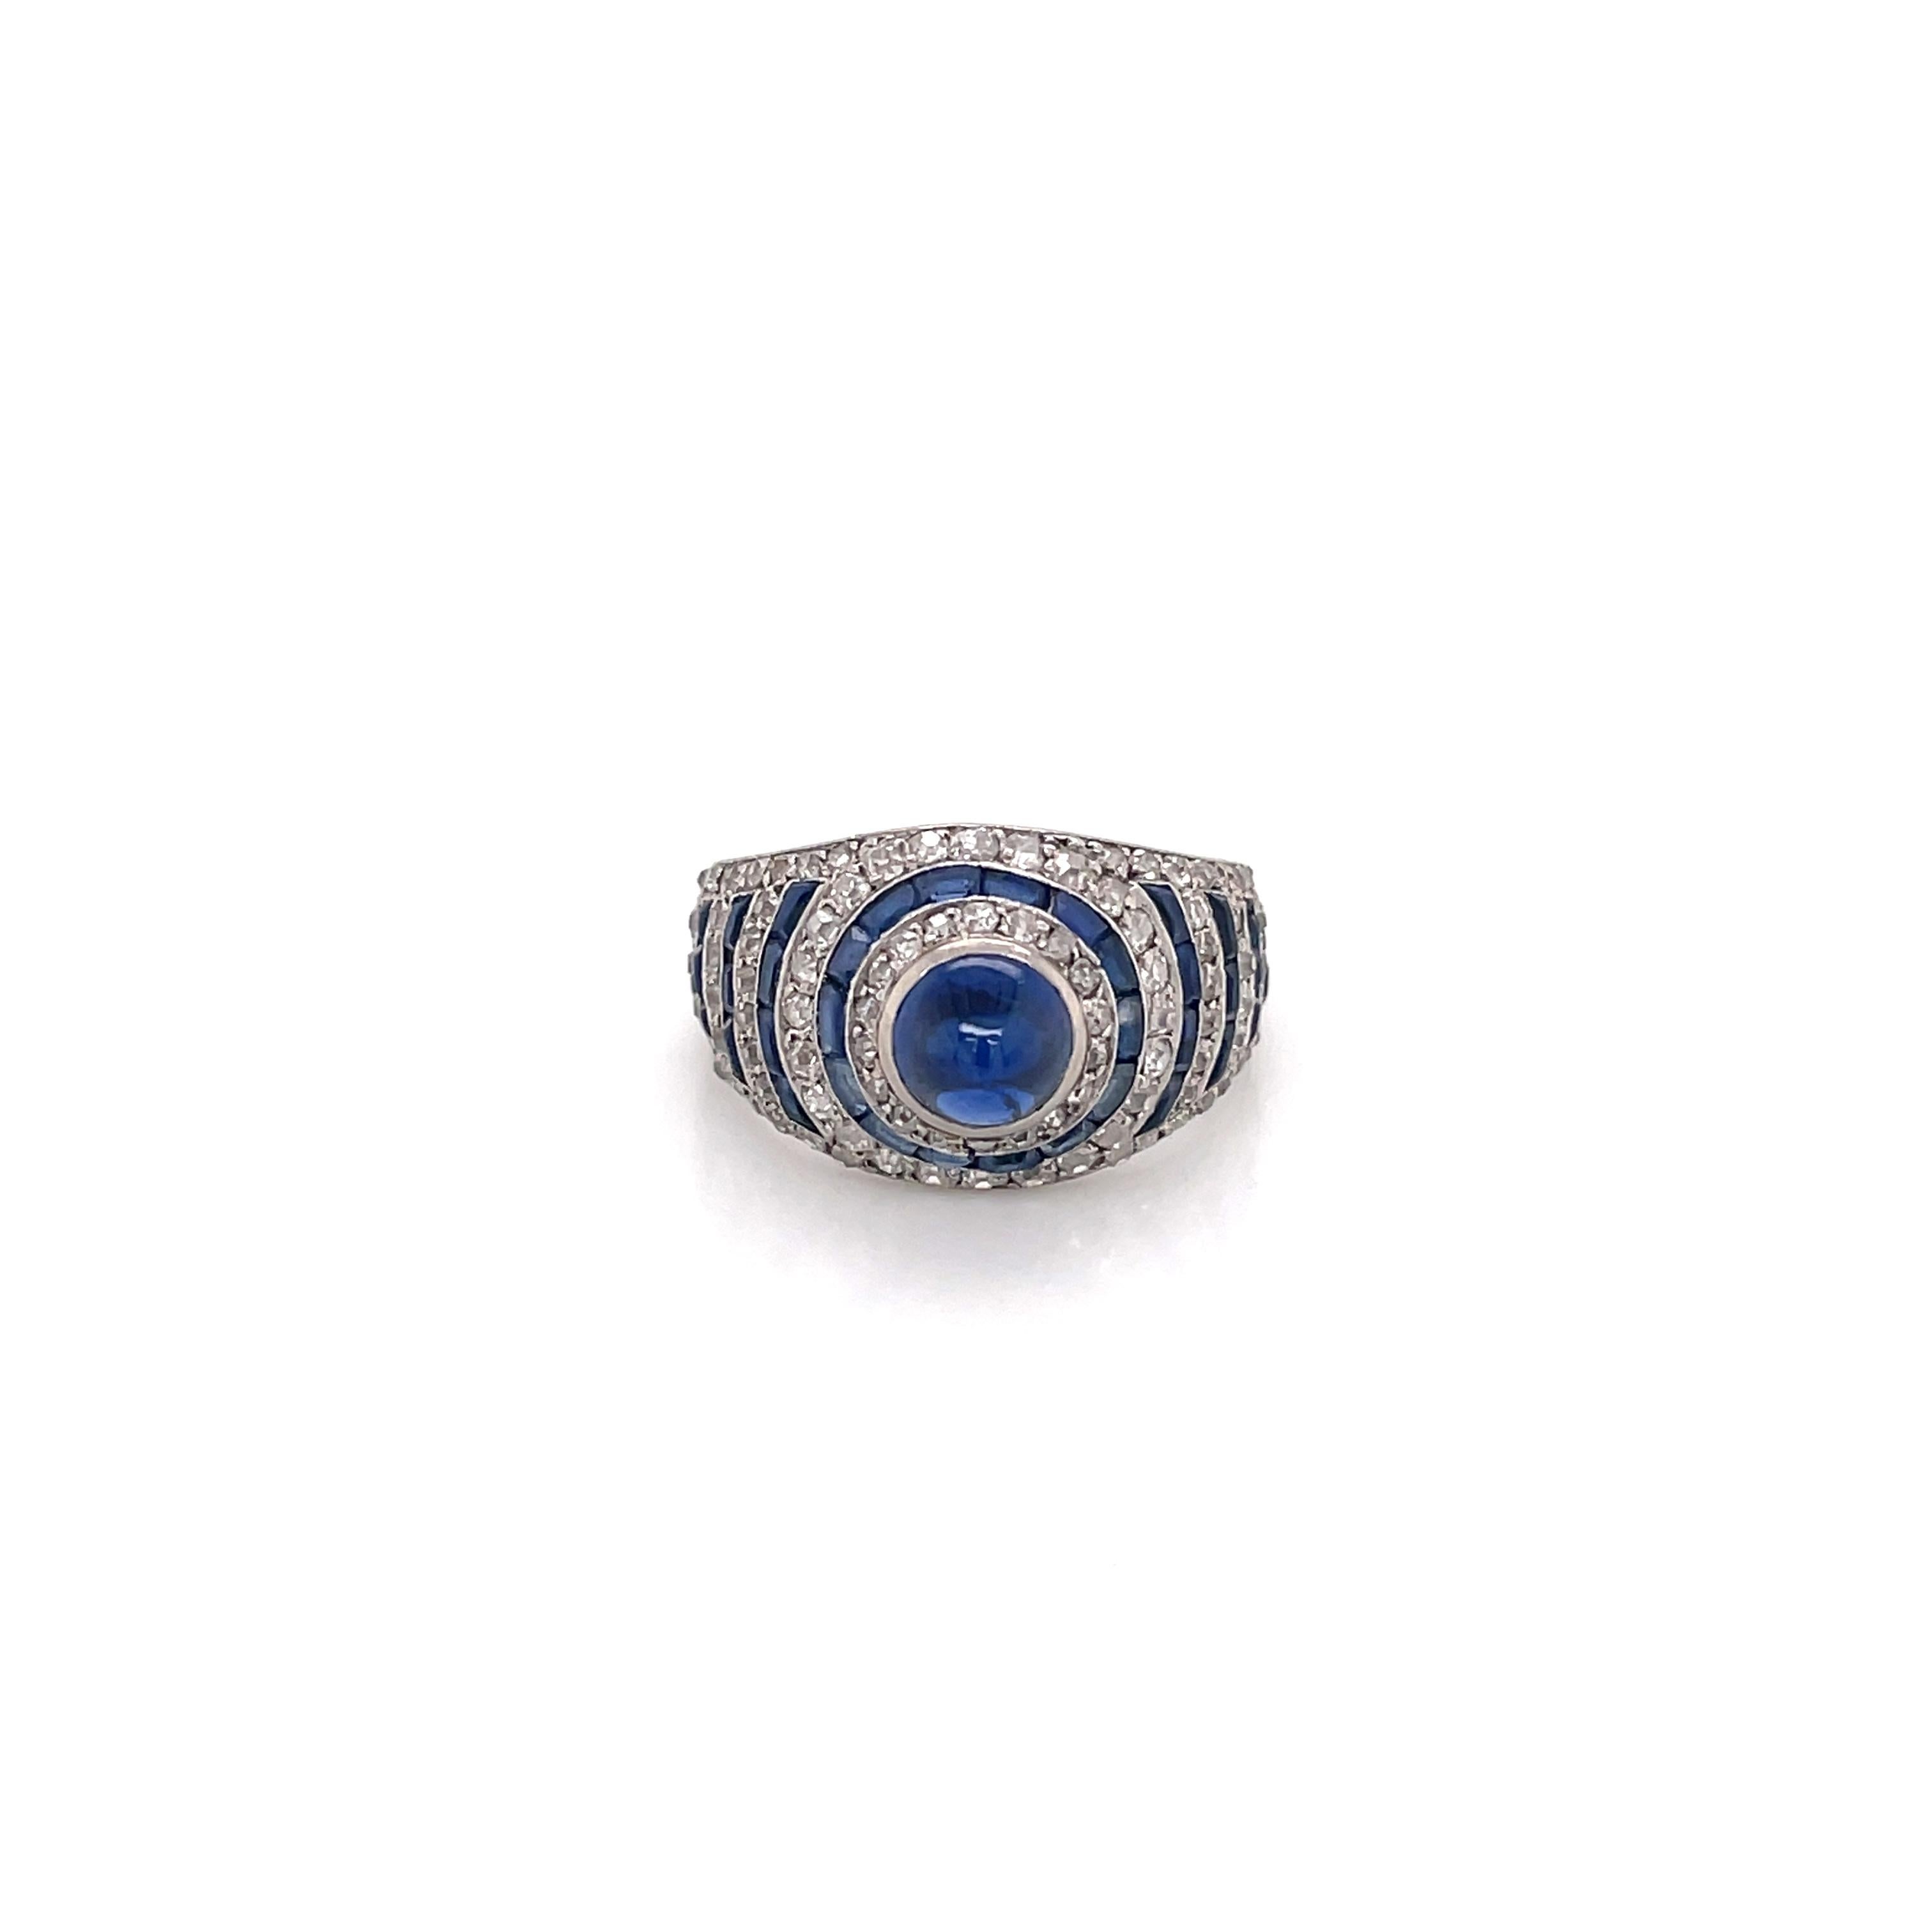 A classic Art Deco ring featuring a 1.15CT Cabochon Sapphire as the center stone, 40 Baguette cut sapphires, and 105 Old Mine Cut VS-SI Clarity Diamonds as the side stones. 

Inquiries for additional photos, videos, and requests to see this piece